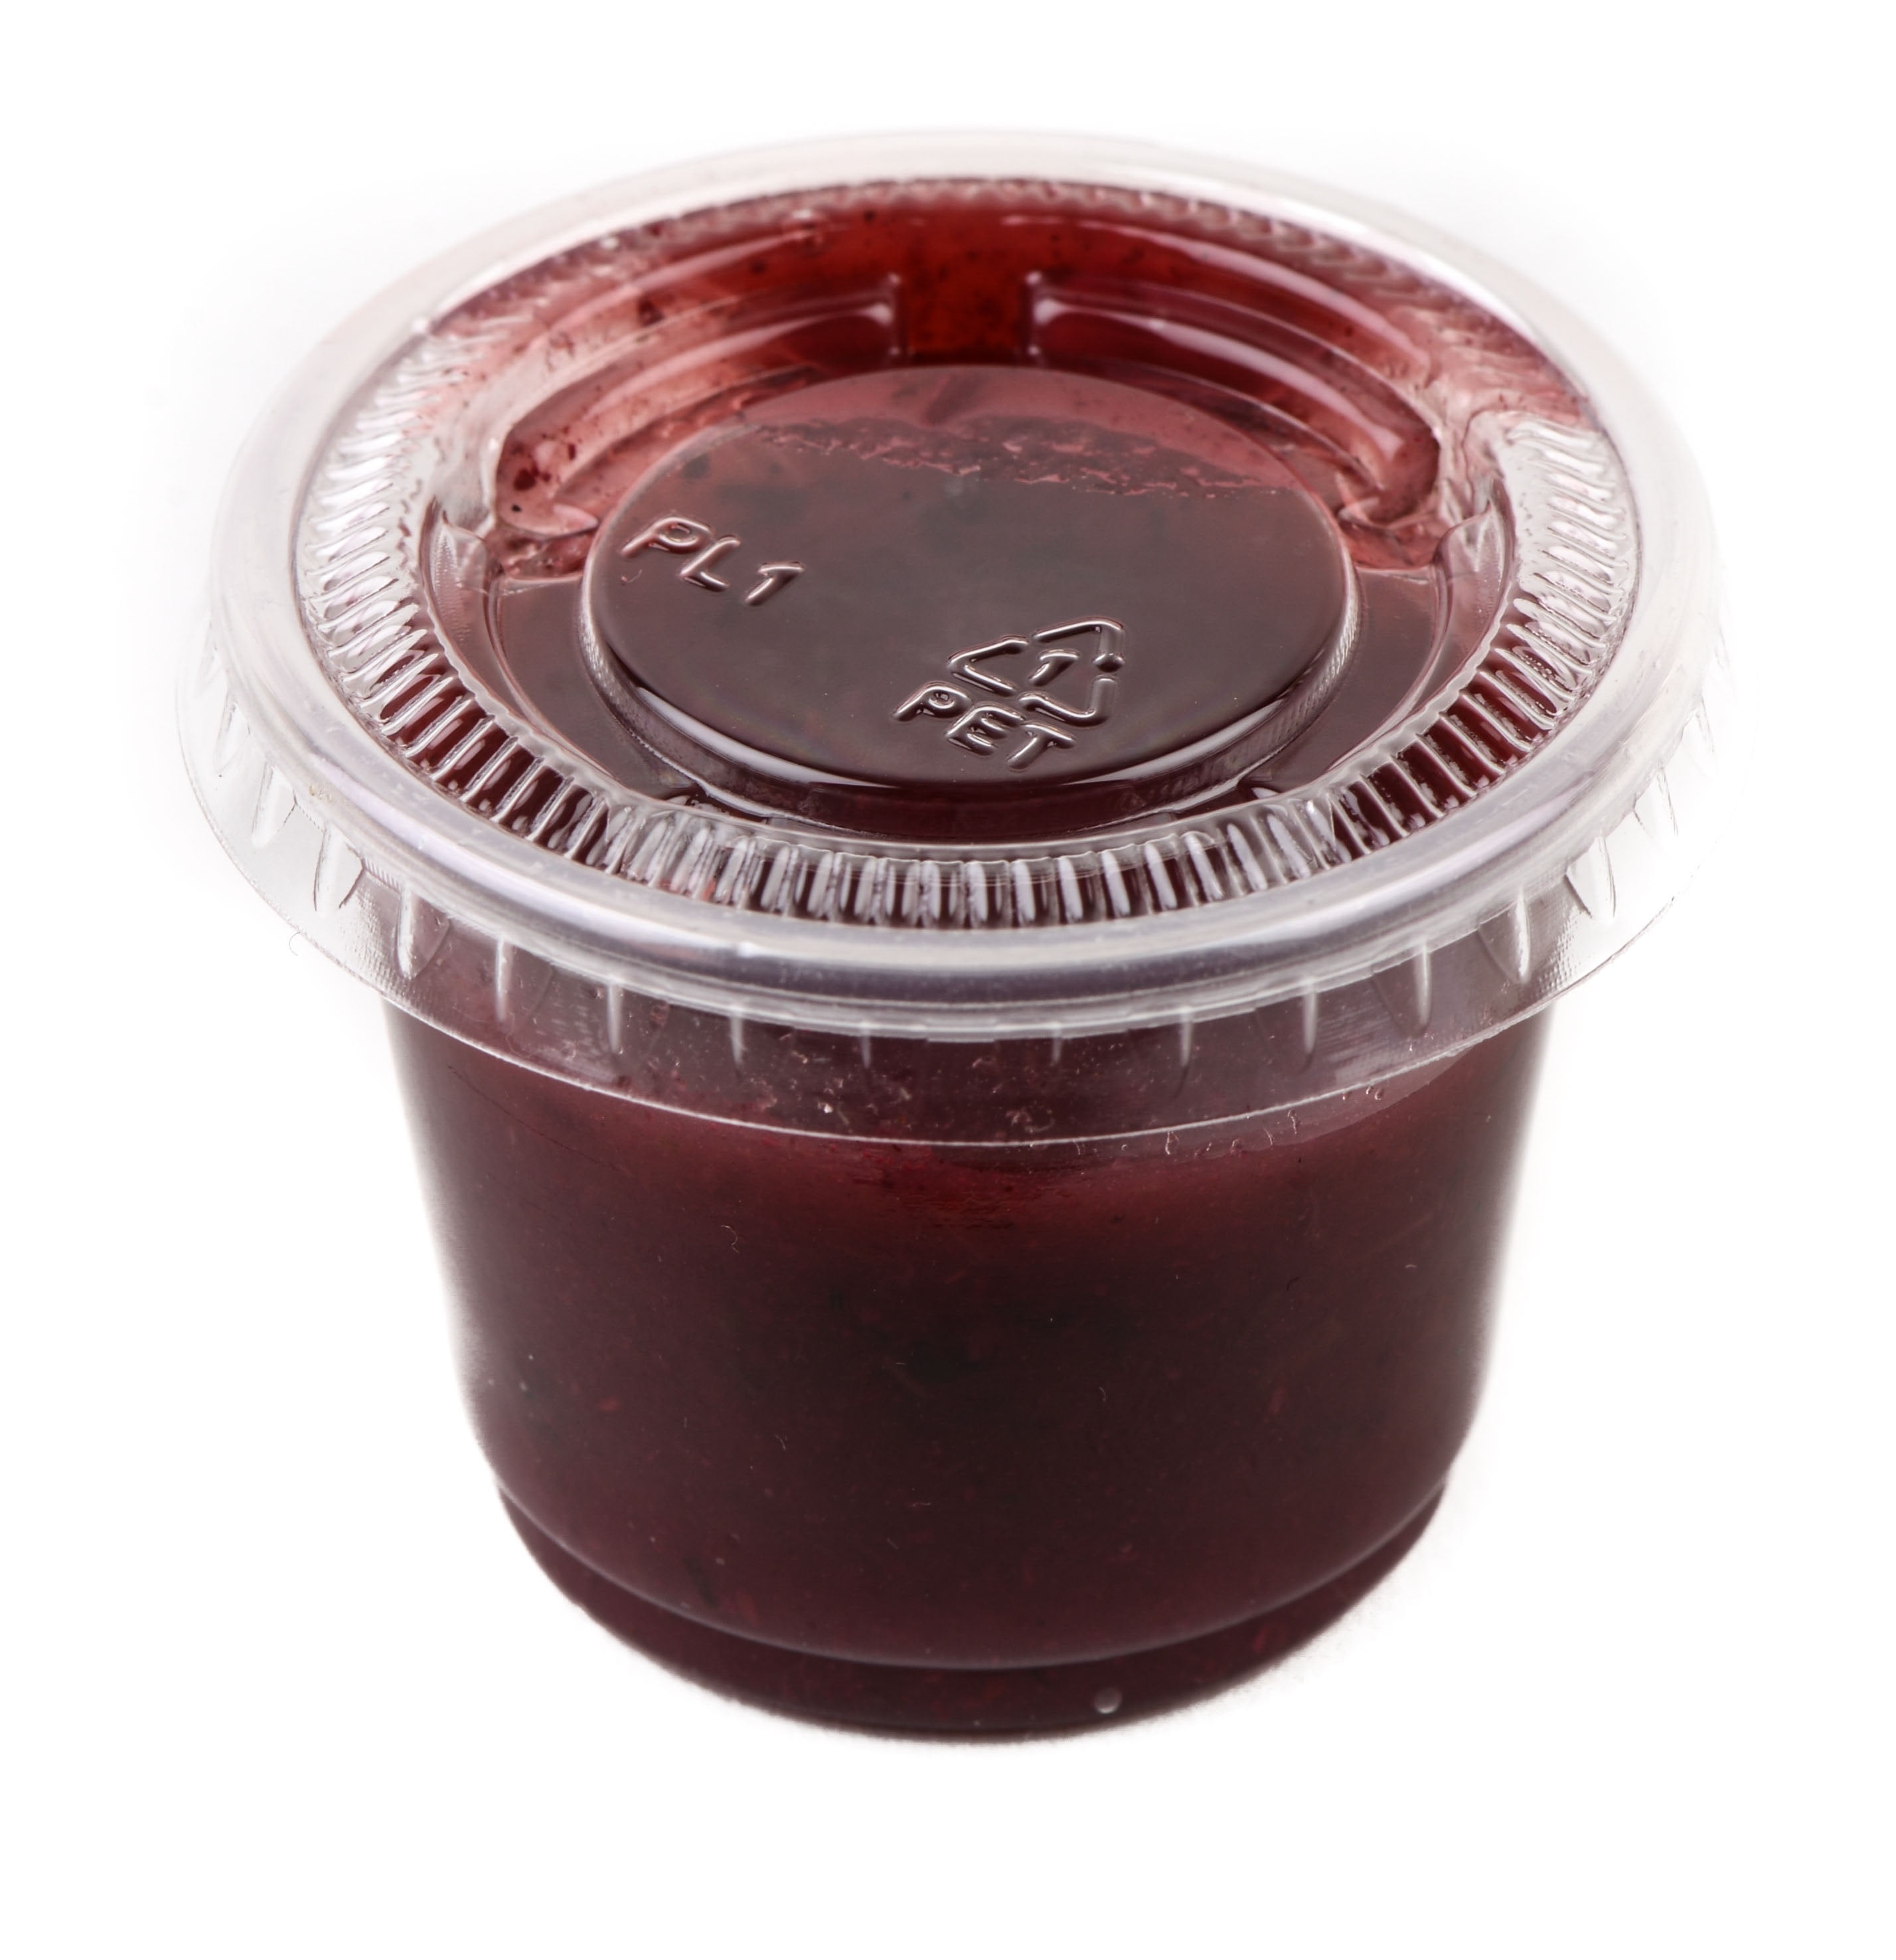 FICUCUSO 200 Sets - 1 oz Jello Shot Cups ,Condiment Containers with  Leak-Proof Lids, Disposable and Recyclable, Condiment Cups with Lids for  Sauces, Souffle, Food Samples, Pills and More. 1oz-200 sets with lids